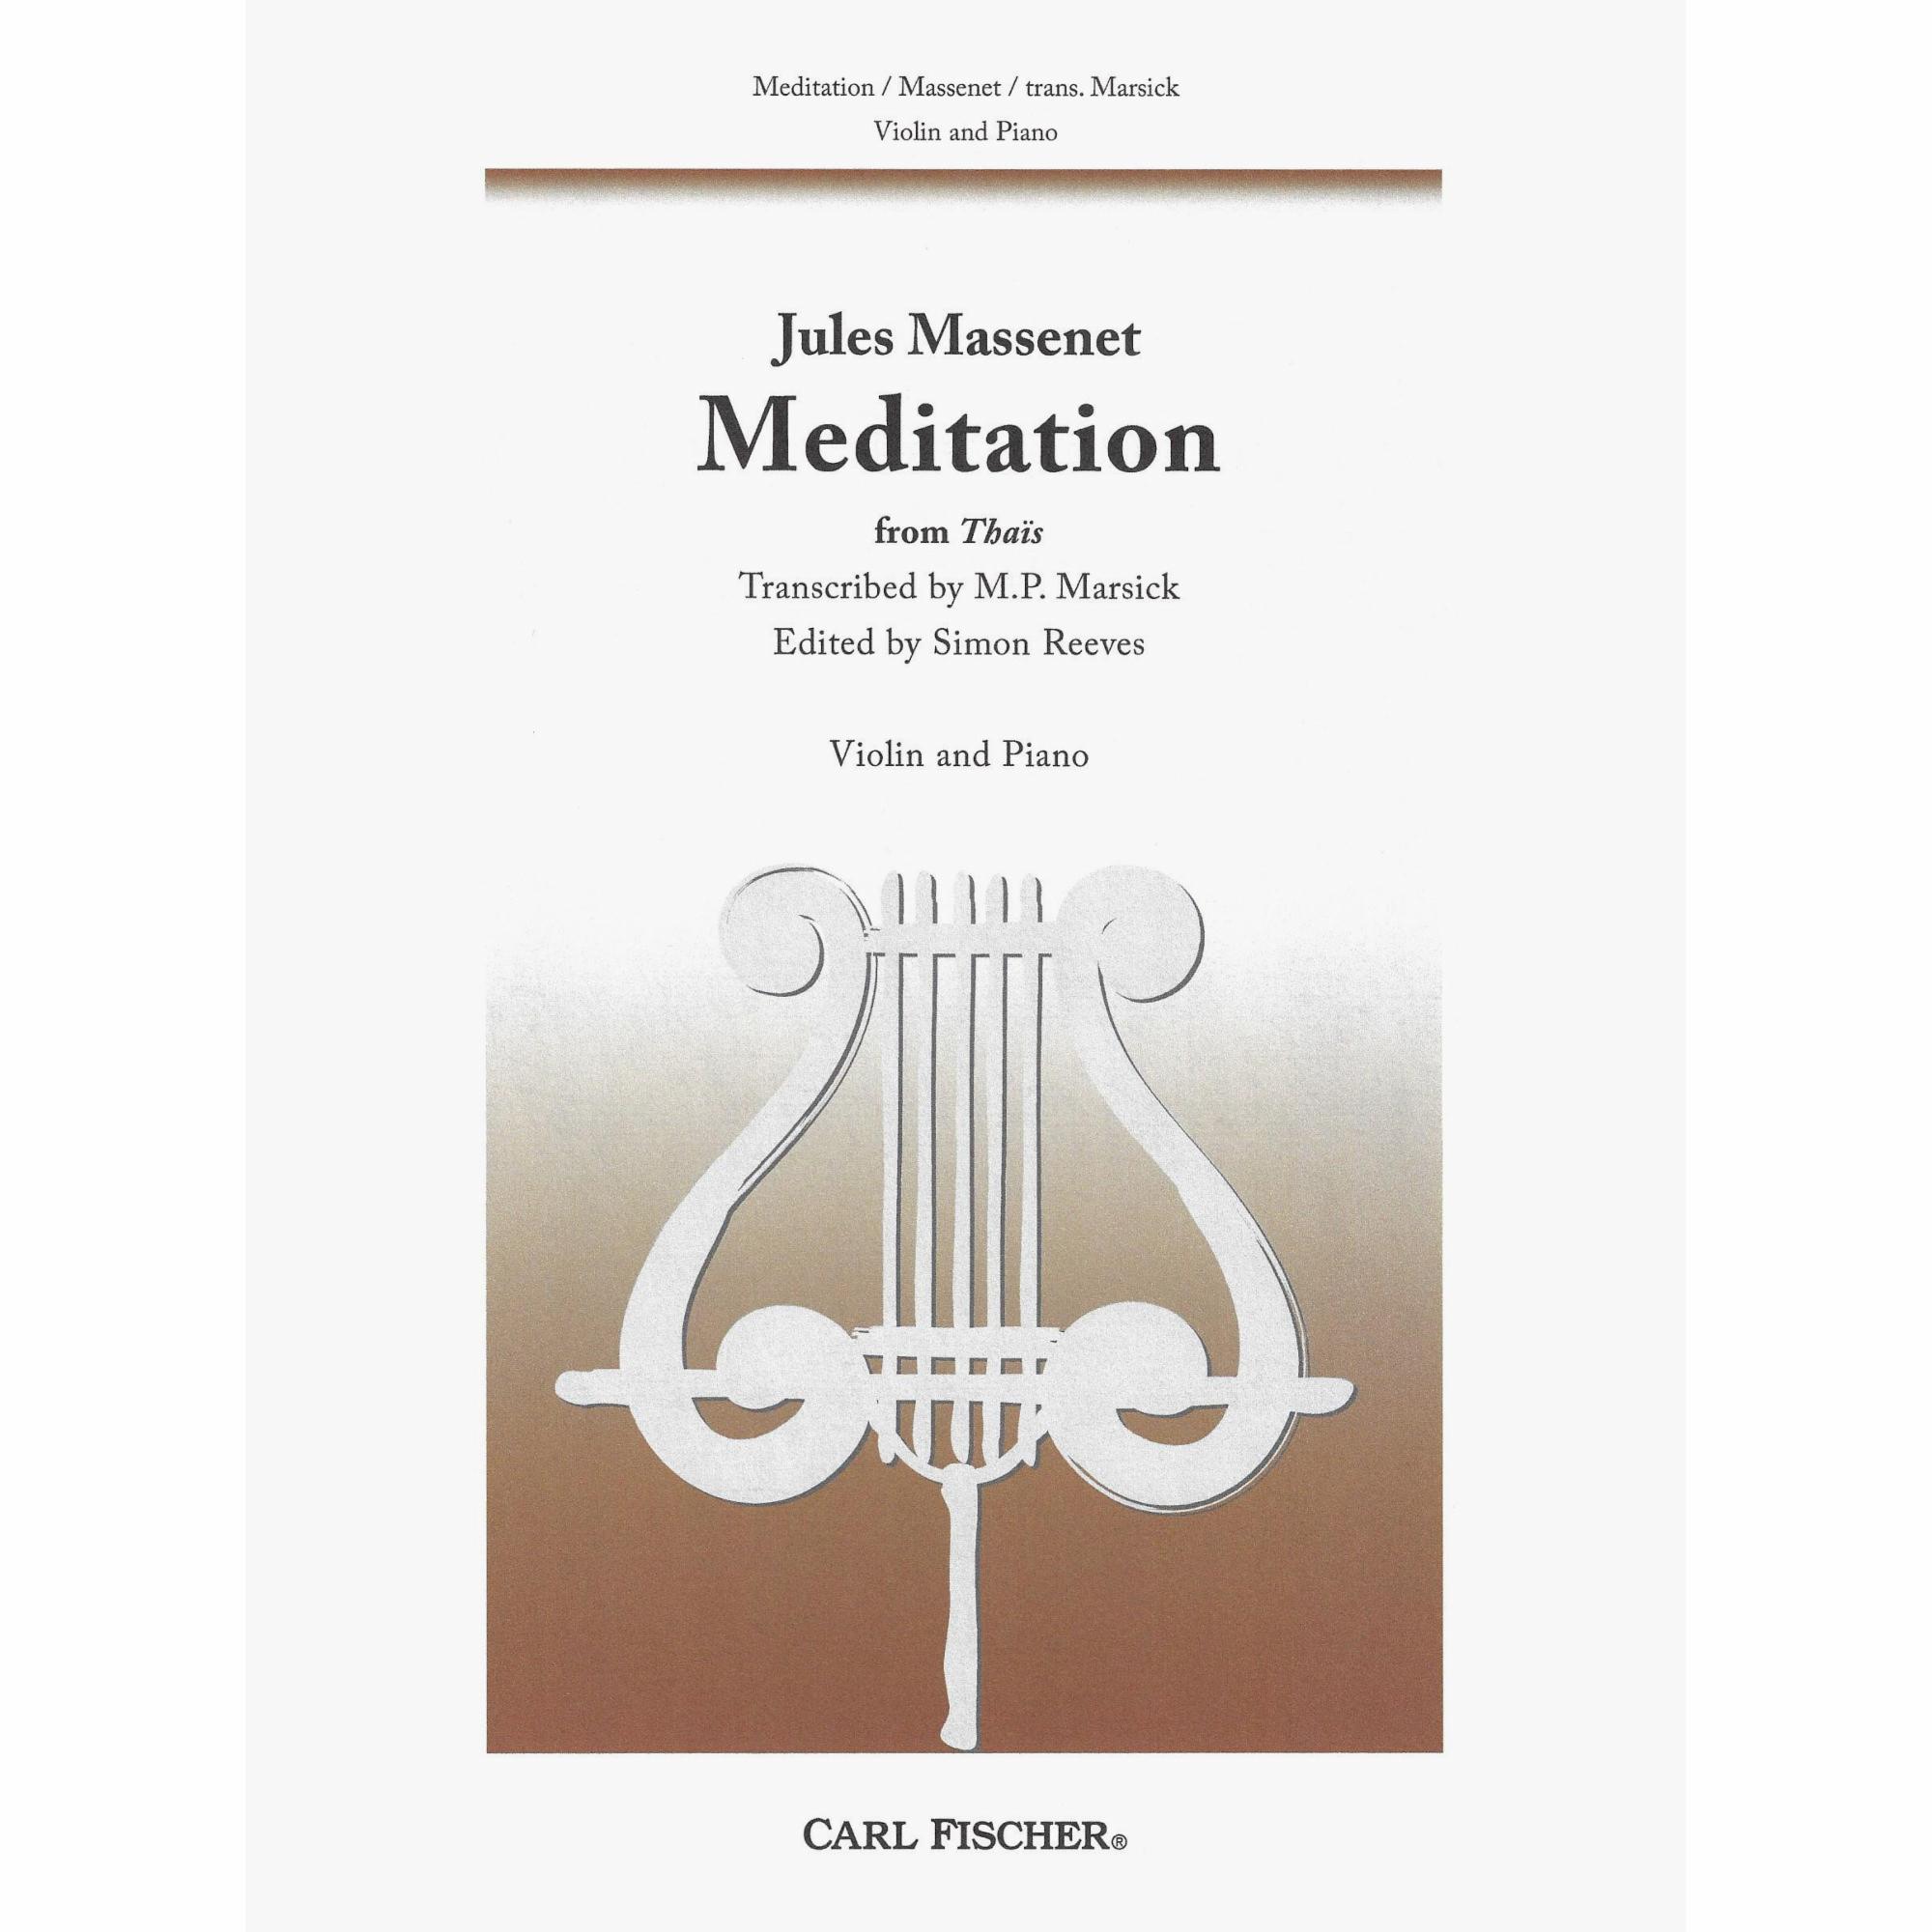 Massenet -- Meditation from Thais for Violin and Piano